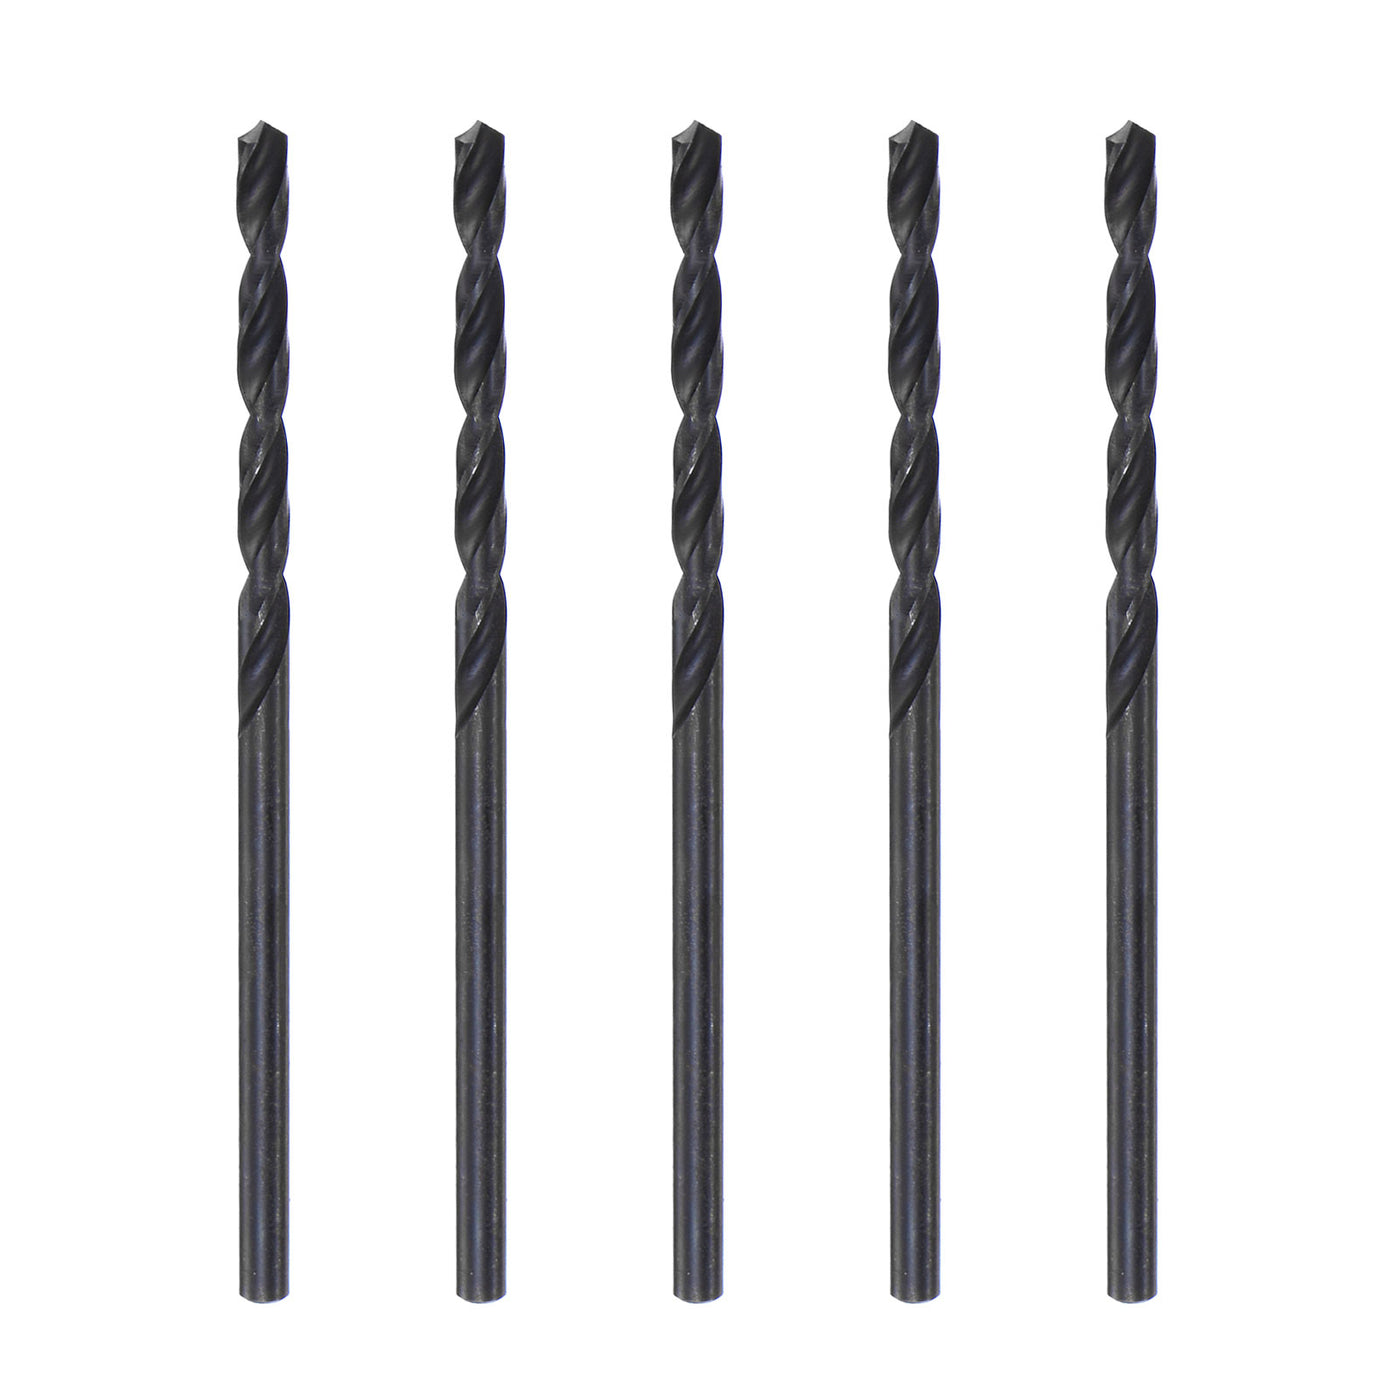 uxcell Uxcell High Speed Steel Twist Drill Bit, 2.3mm Fully Ground Black Oxide 53mm Long 5Pcs